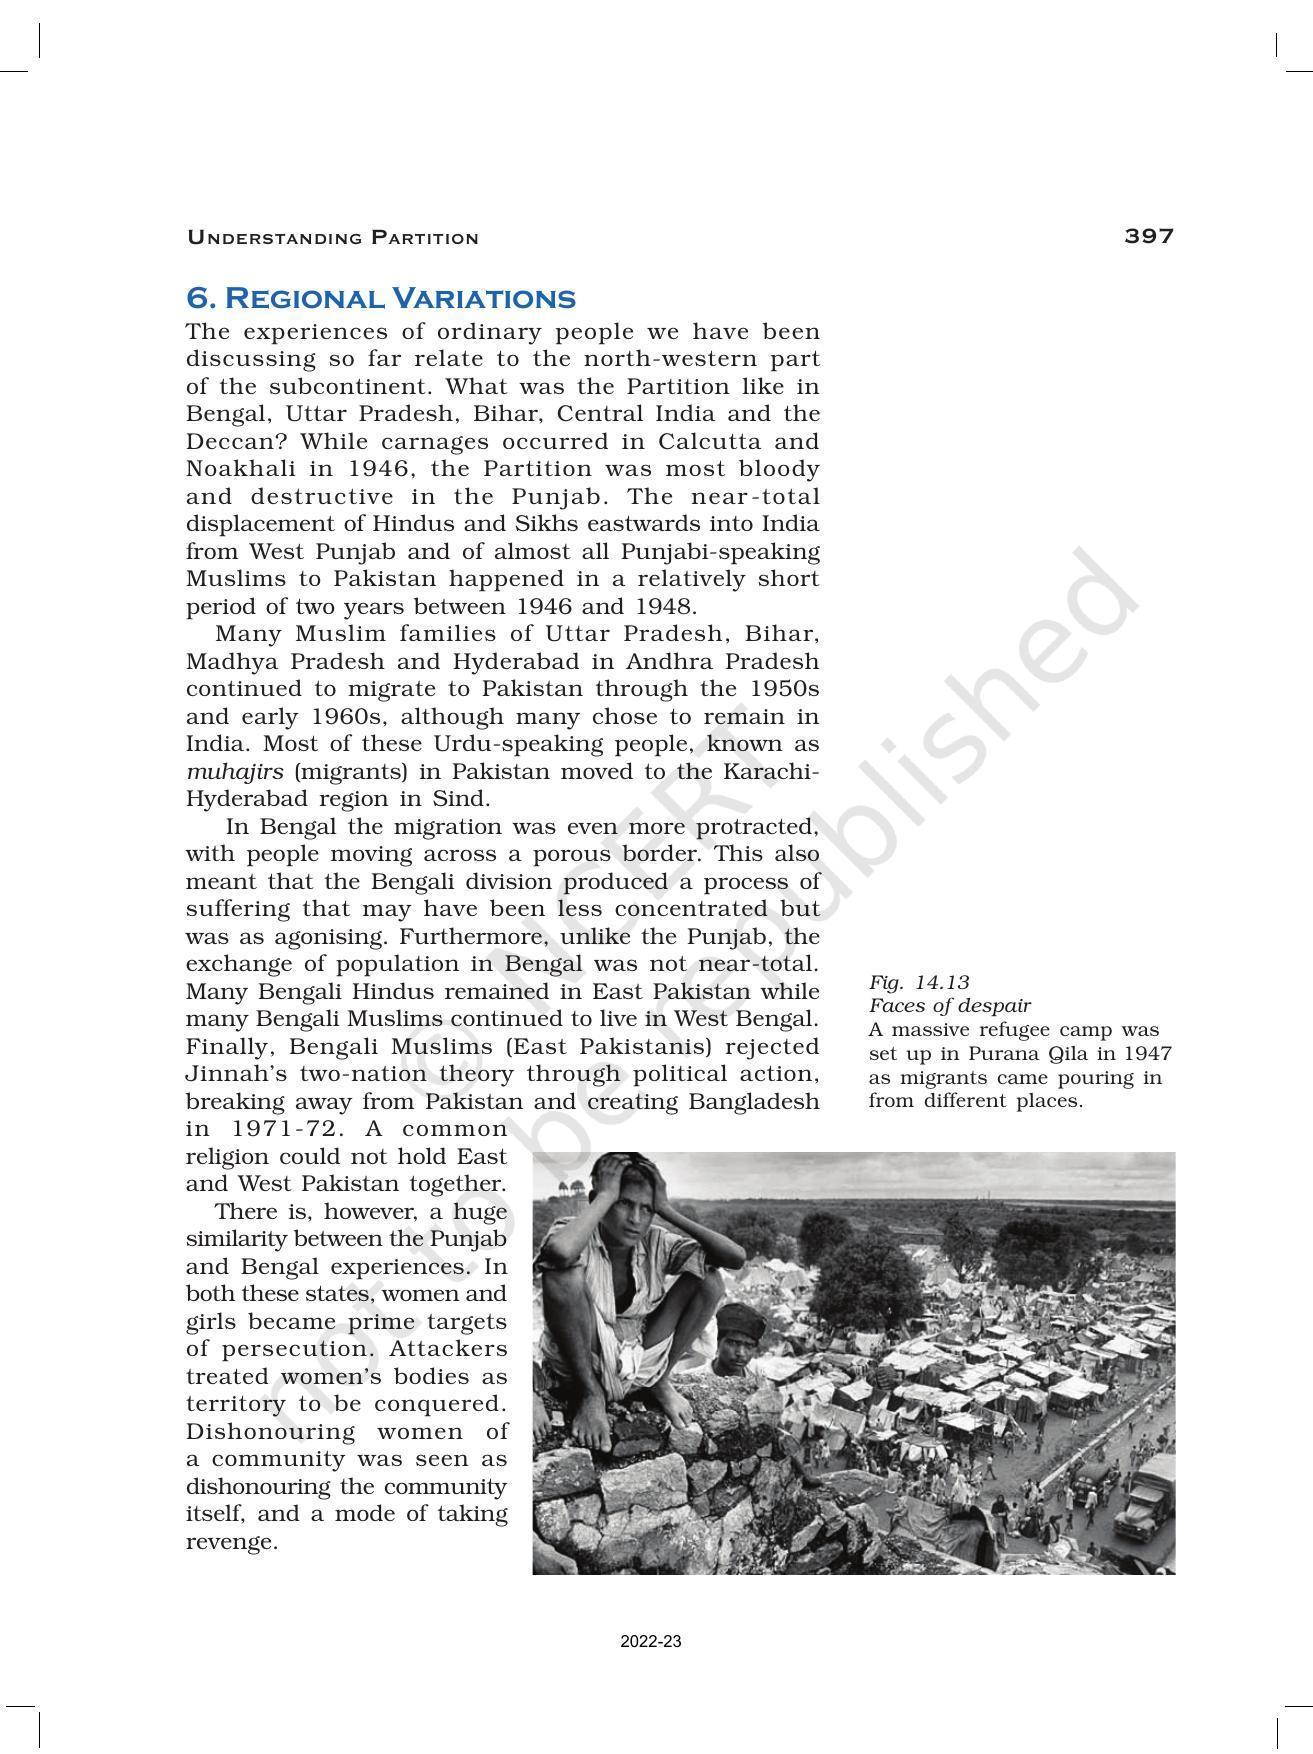 NCERT Book for Class 12 History (Part-III) Chapter 14 Understanding Partition - Page 22